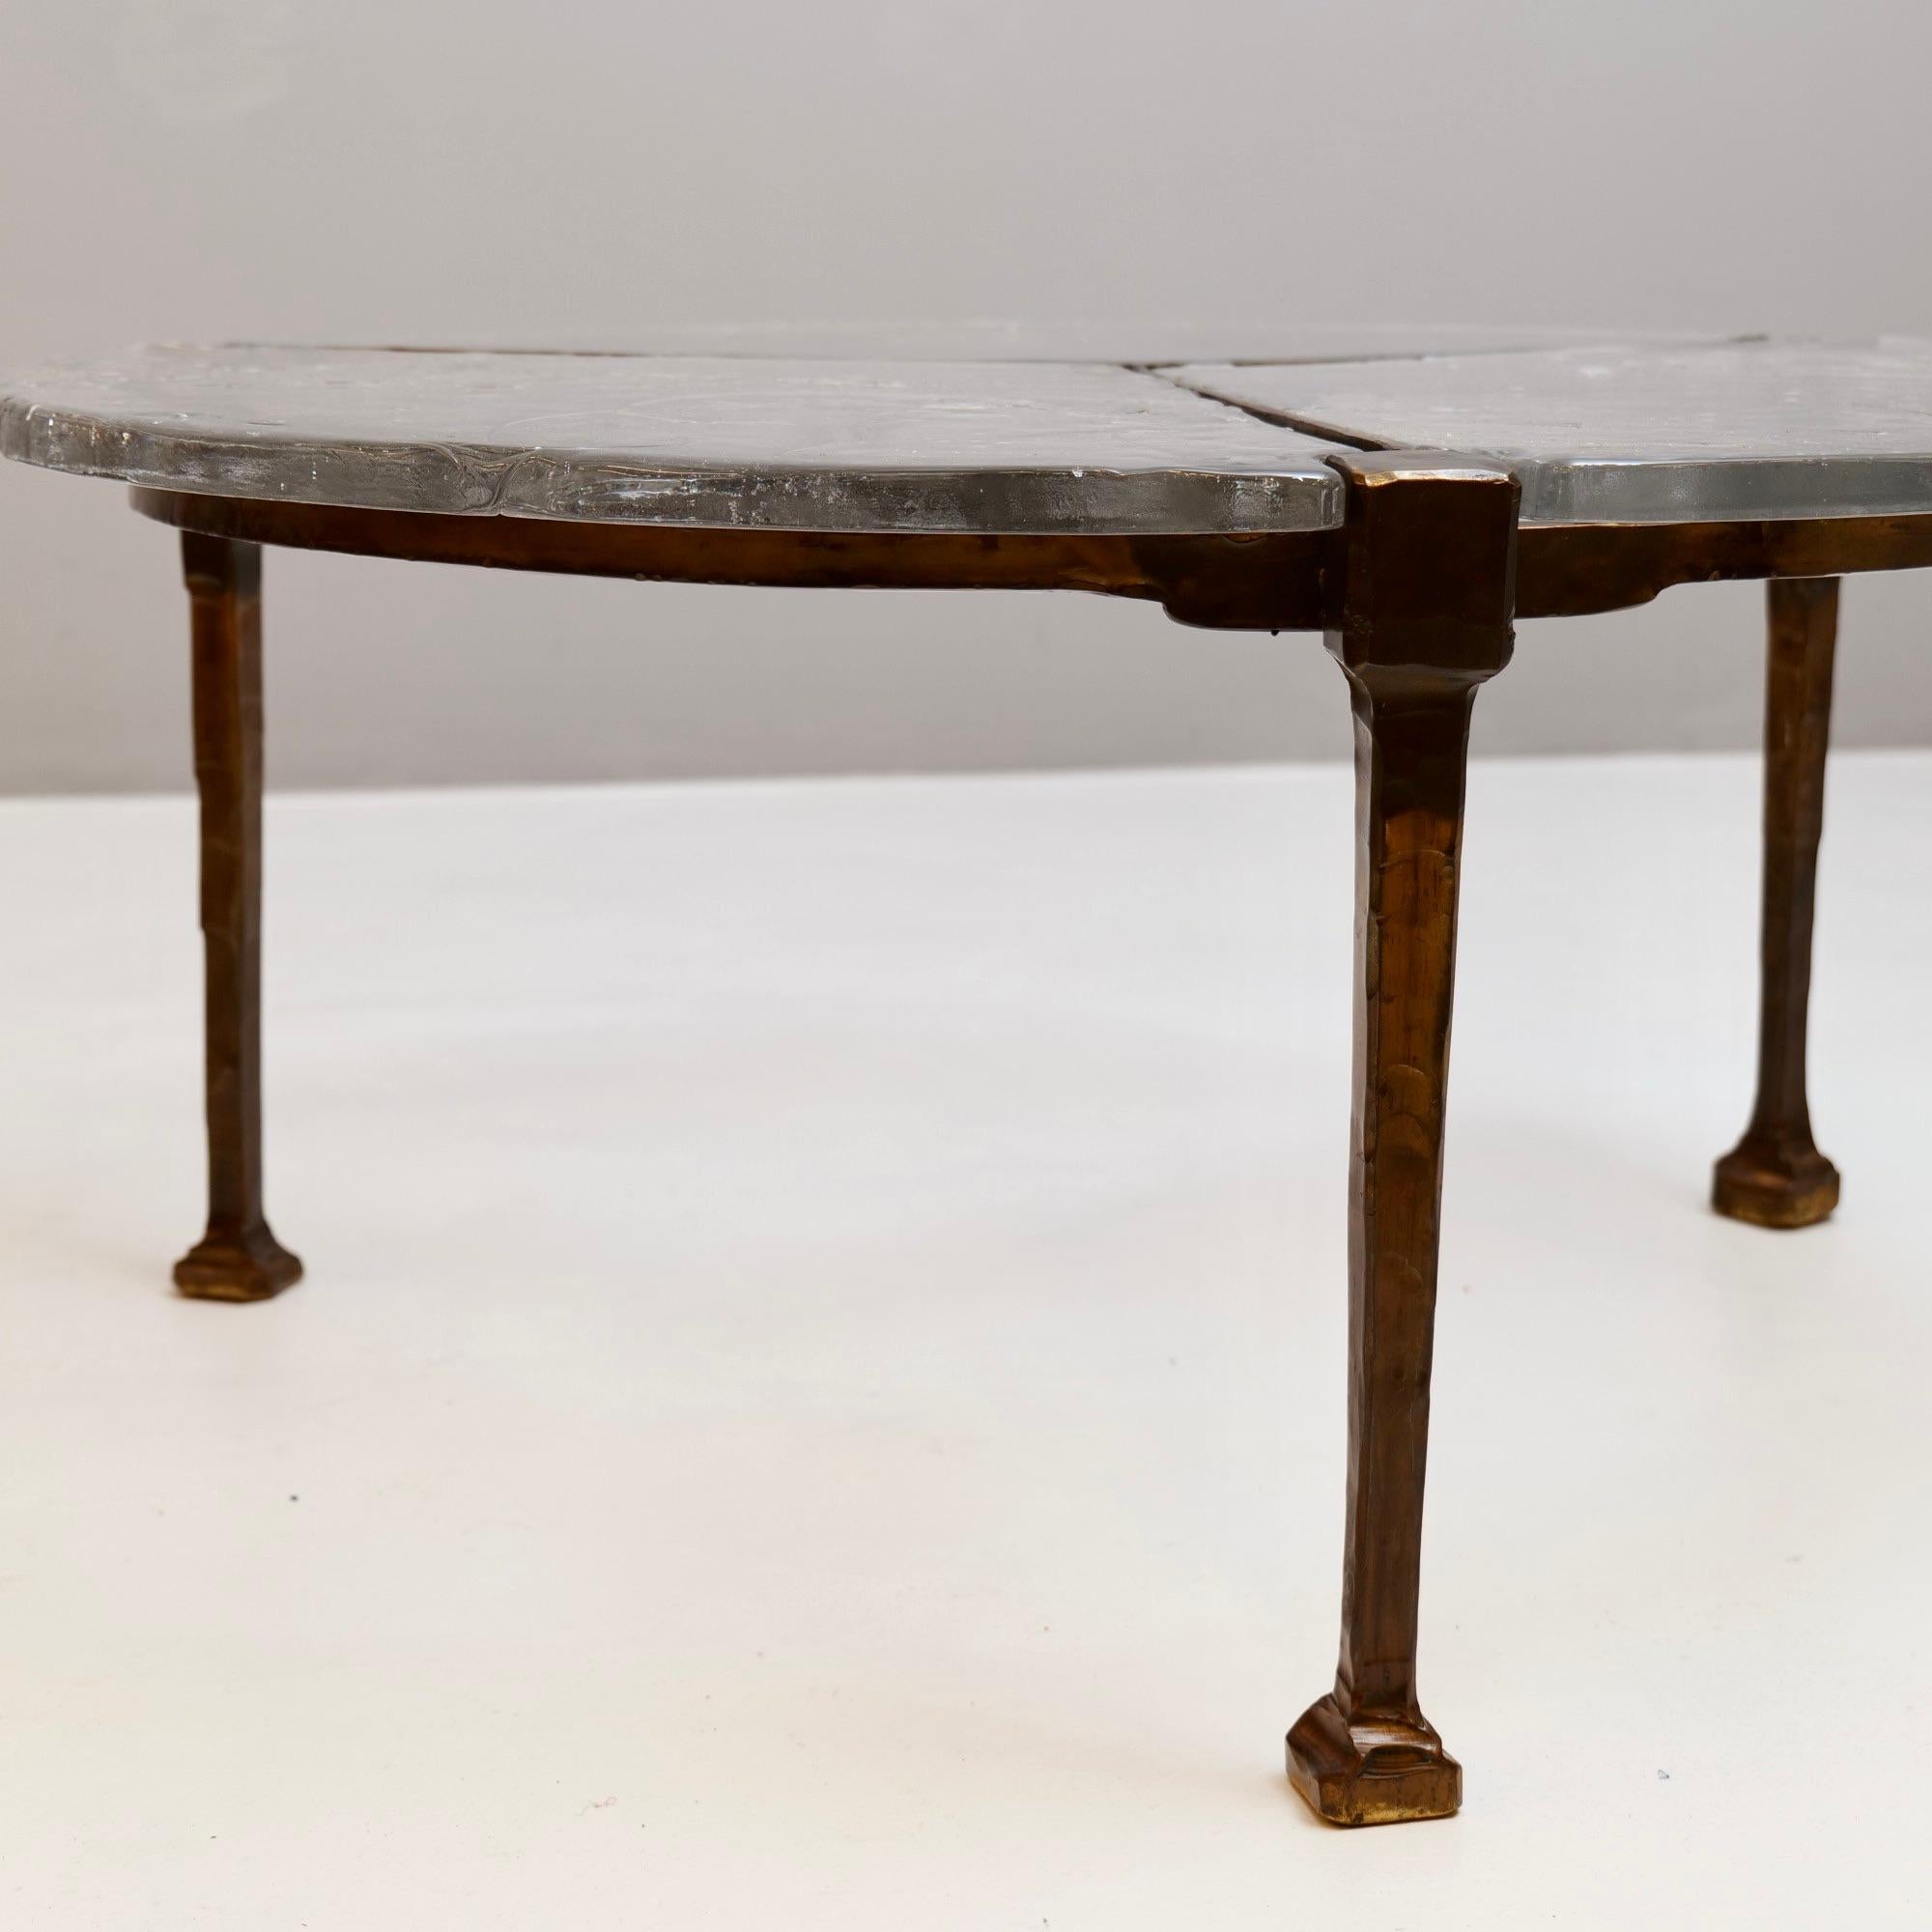 Bronze forged bronze & glass table by Lothar Klute - 1980s For Sale